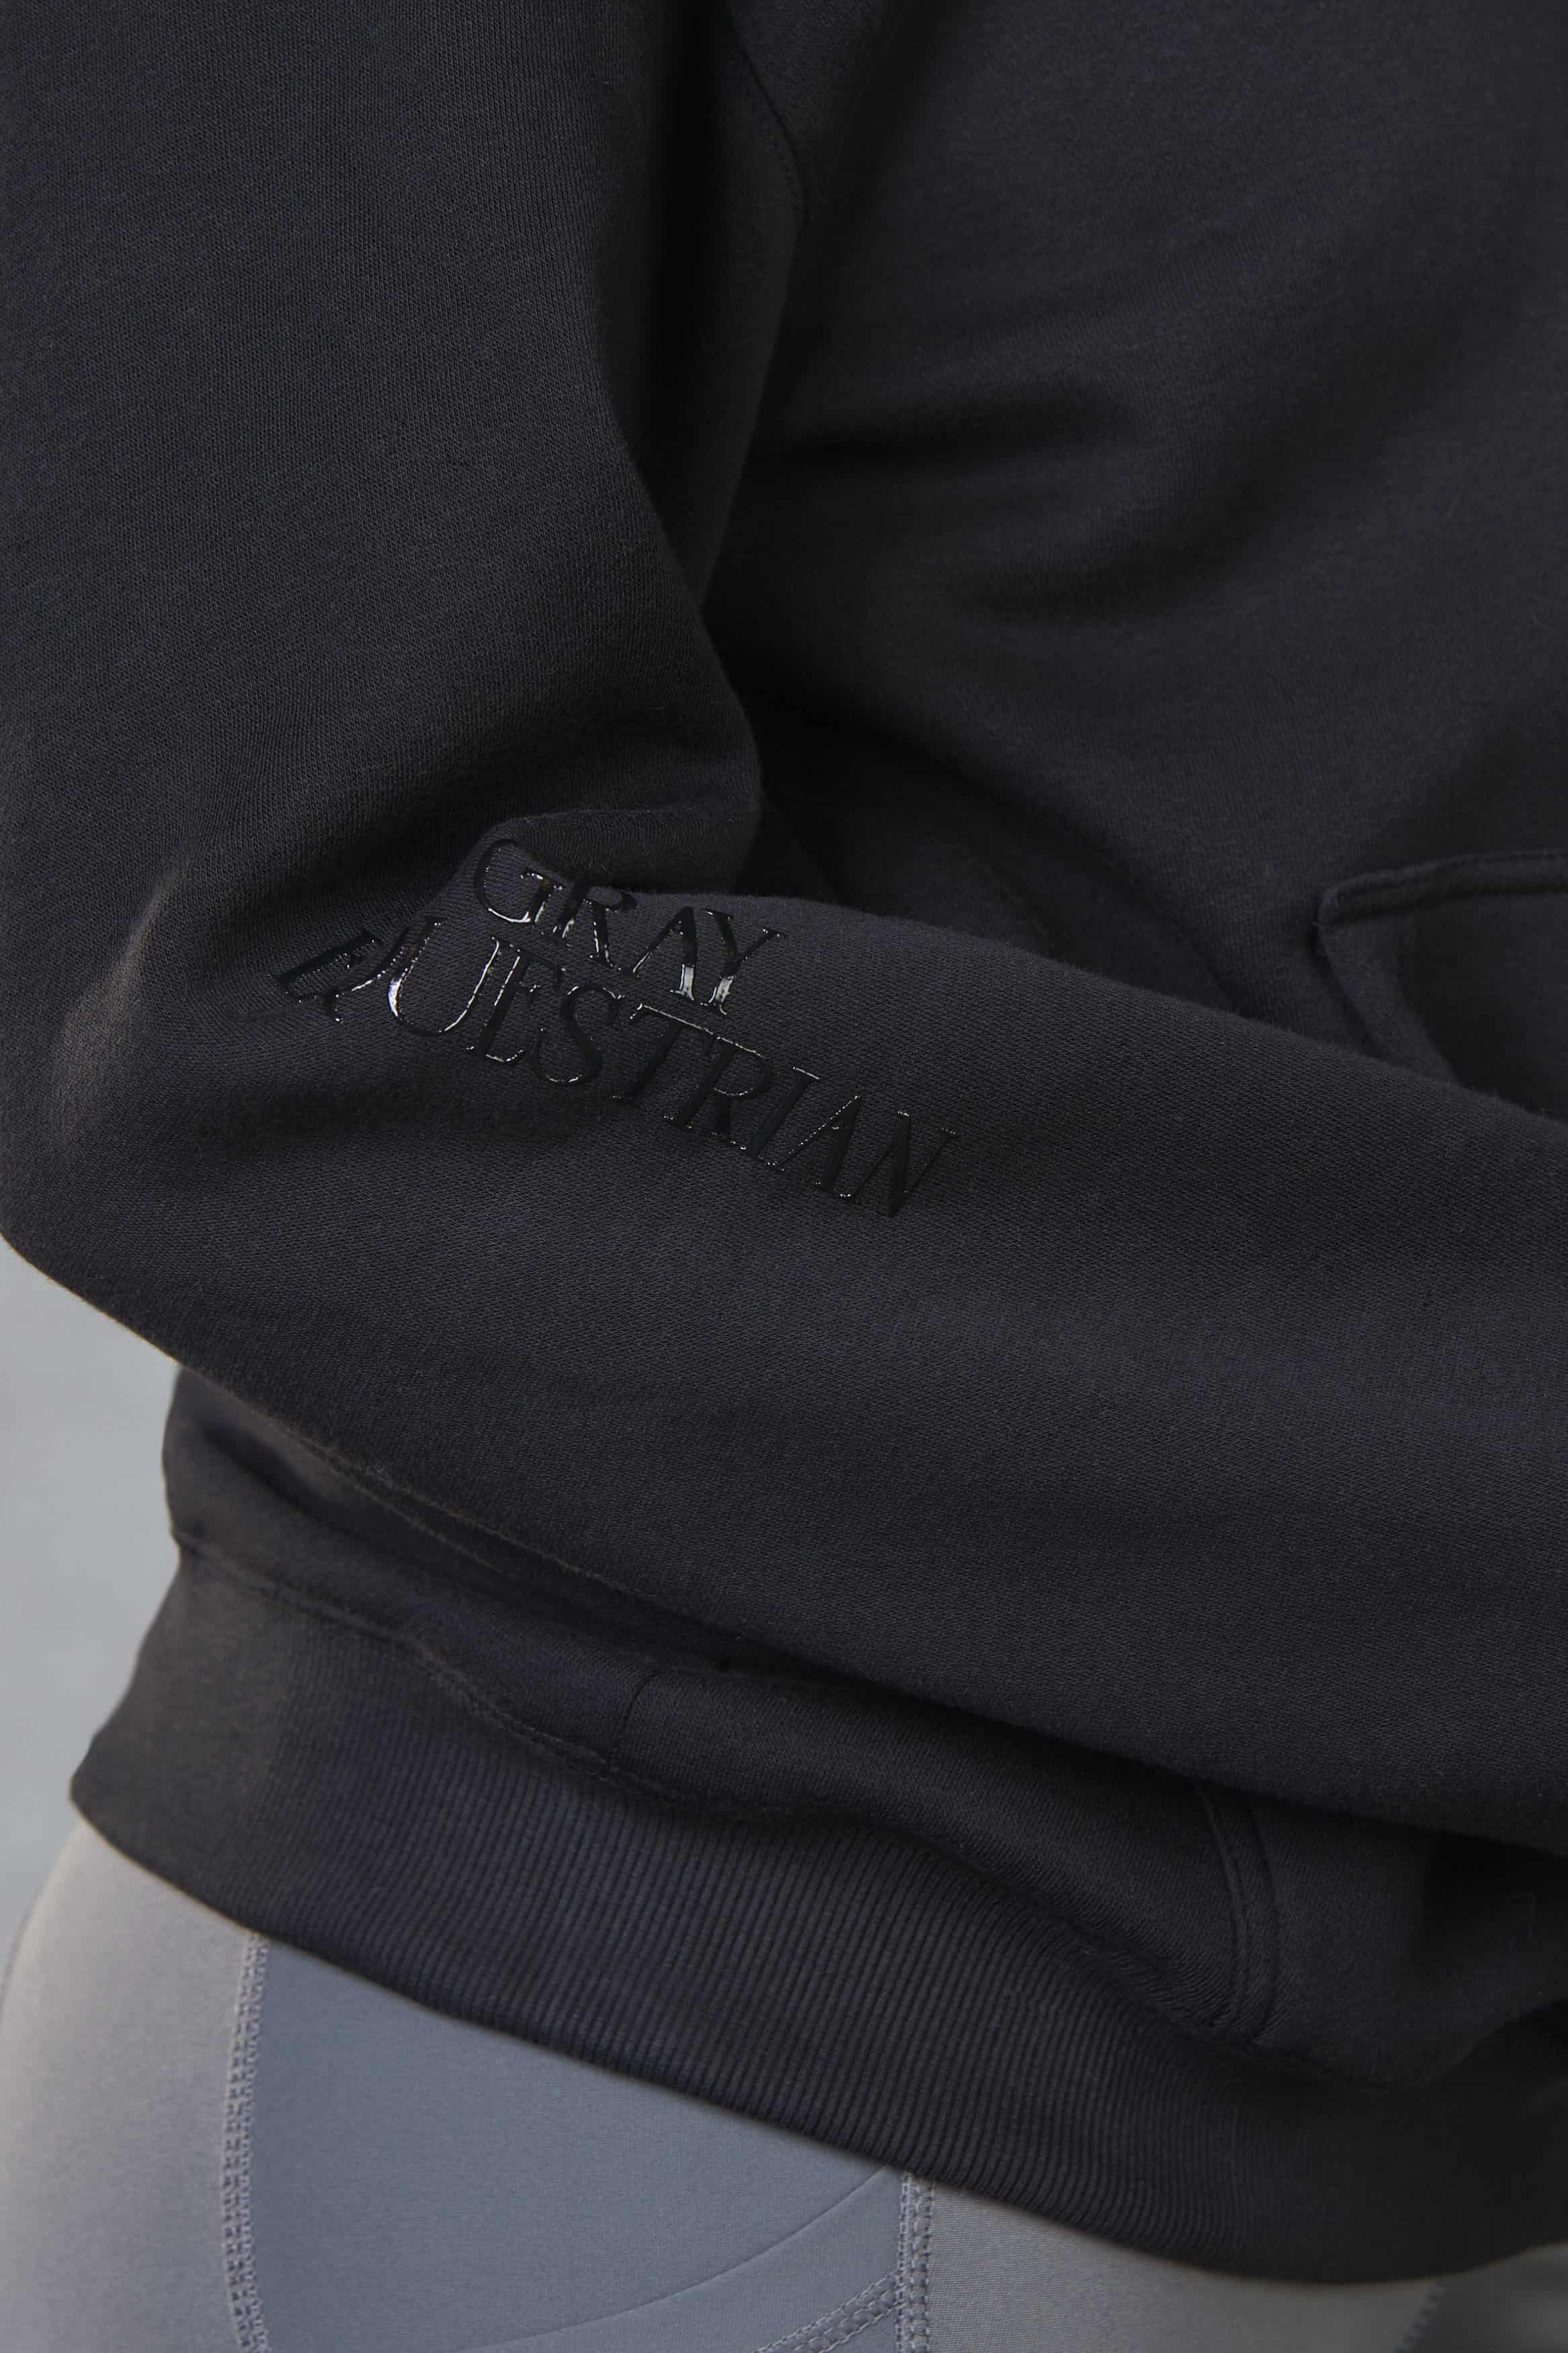 Close up of the black Grey Equestrian detailing on the sleeves.